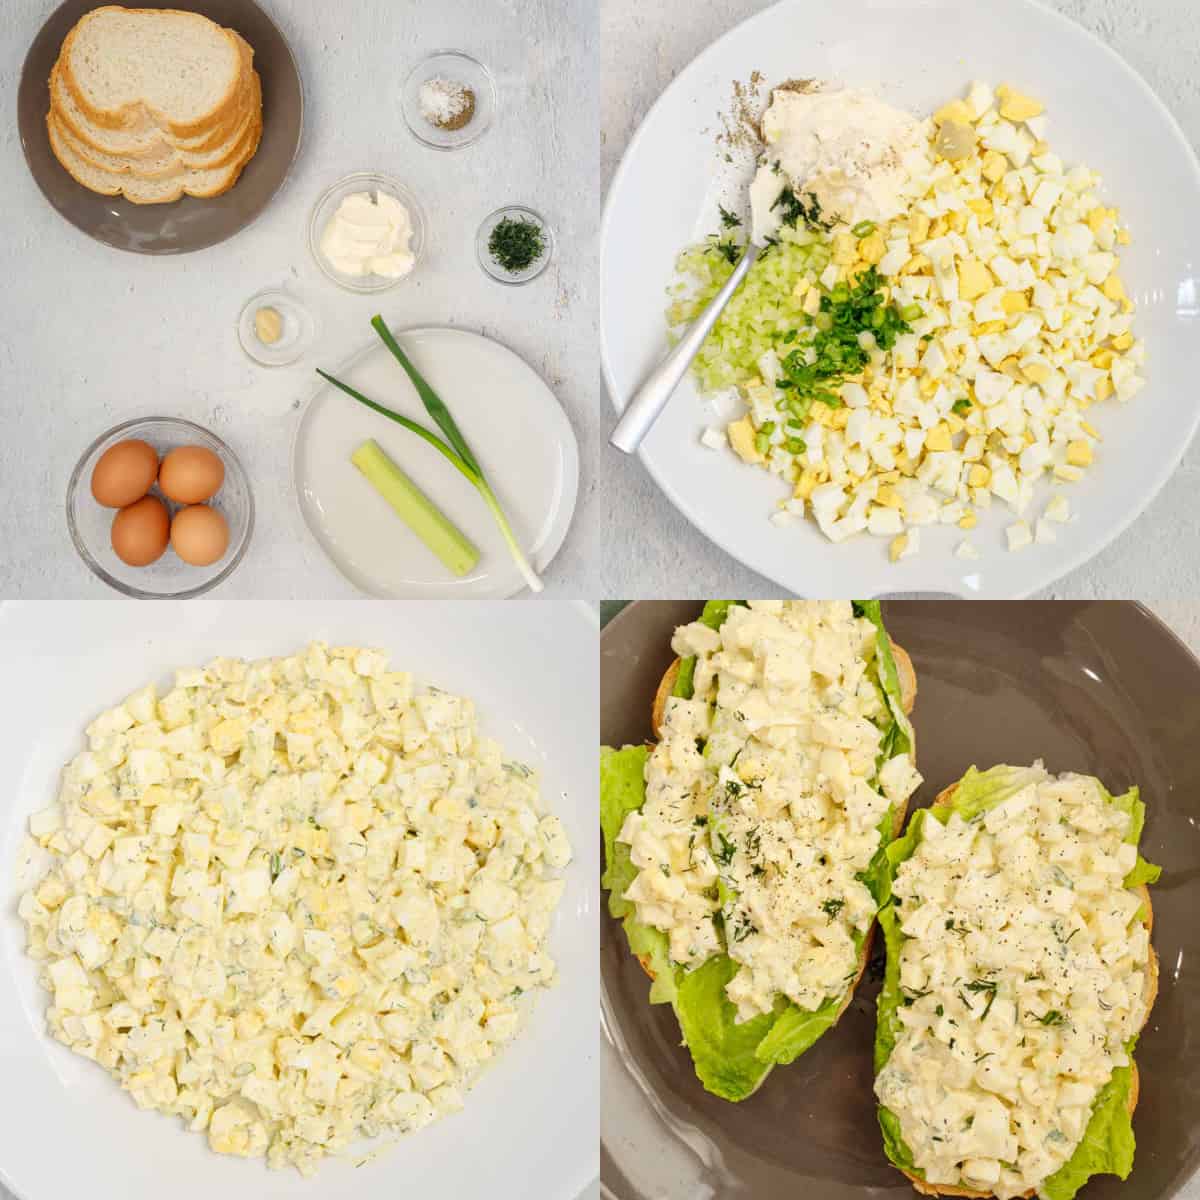 Step by step image collage on how to make egg salad sandwich.